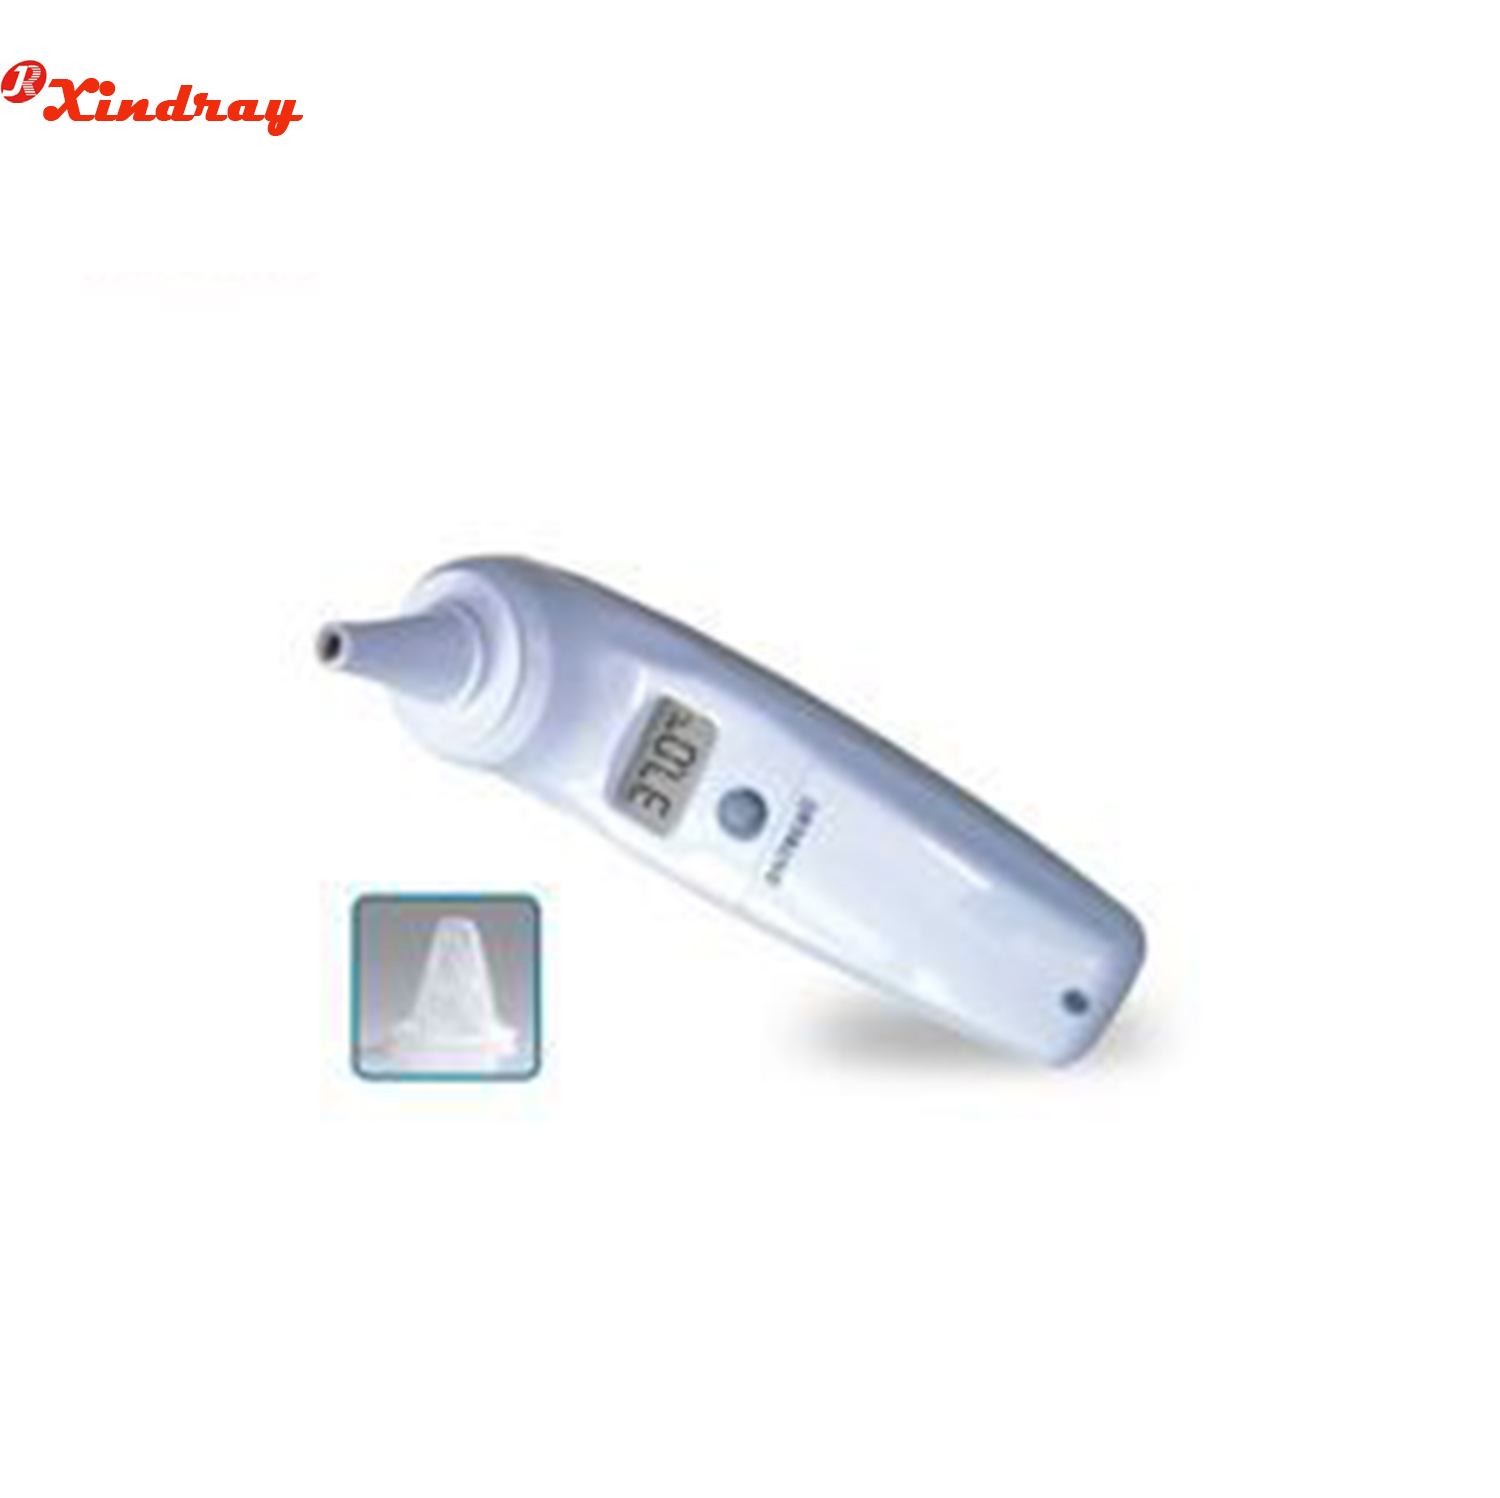 Ear Thermometer With Covers